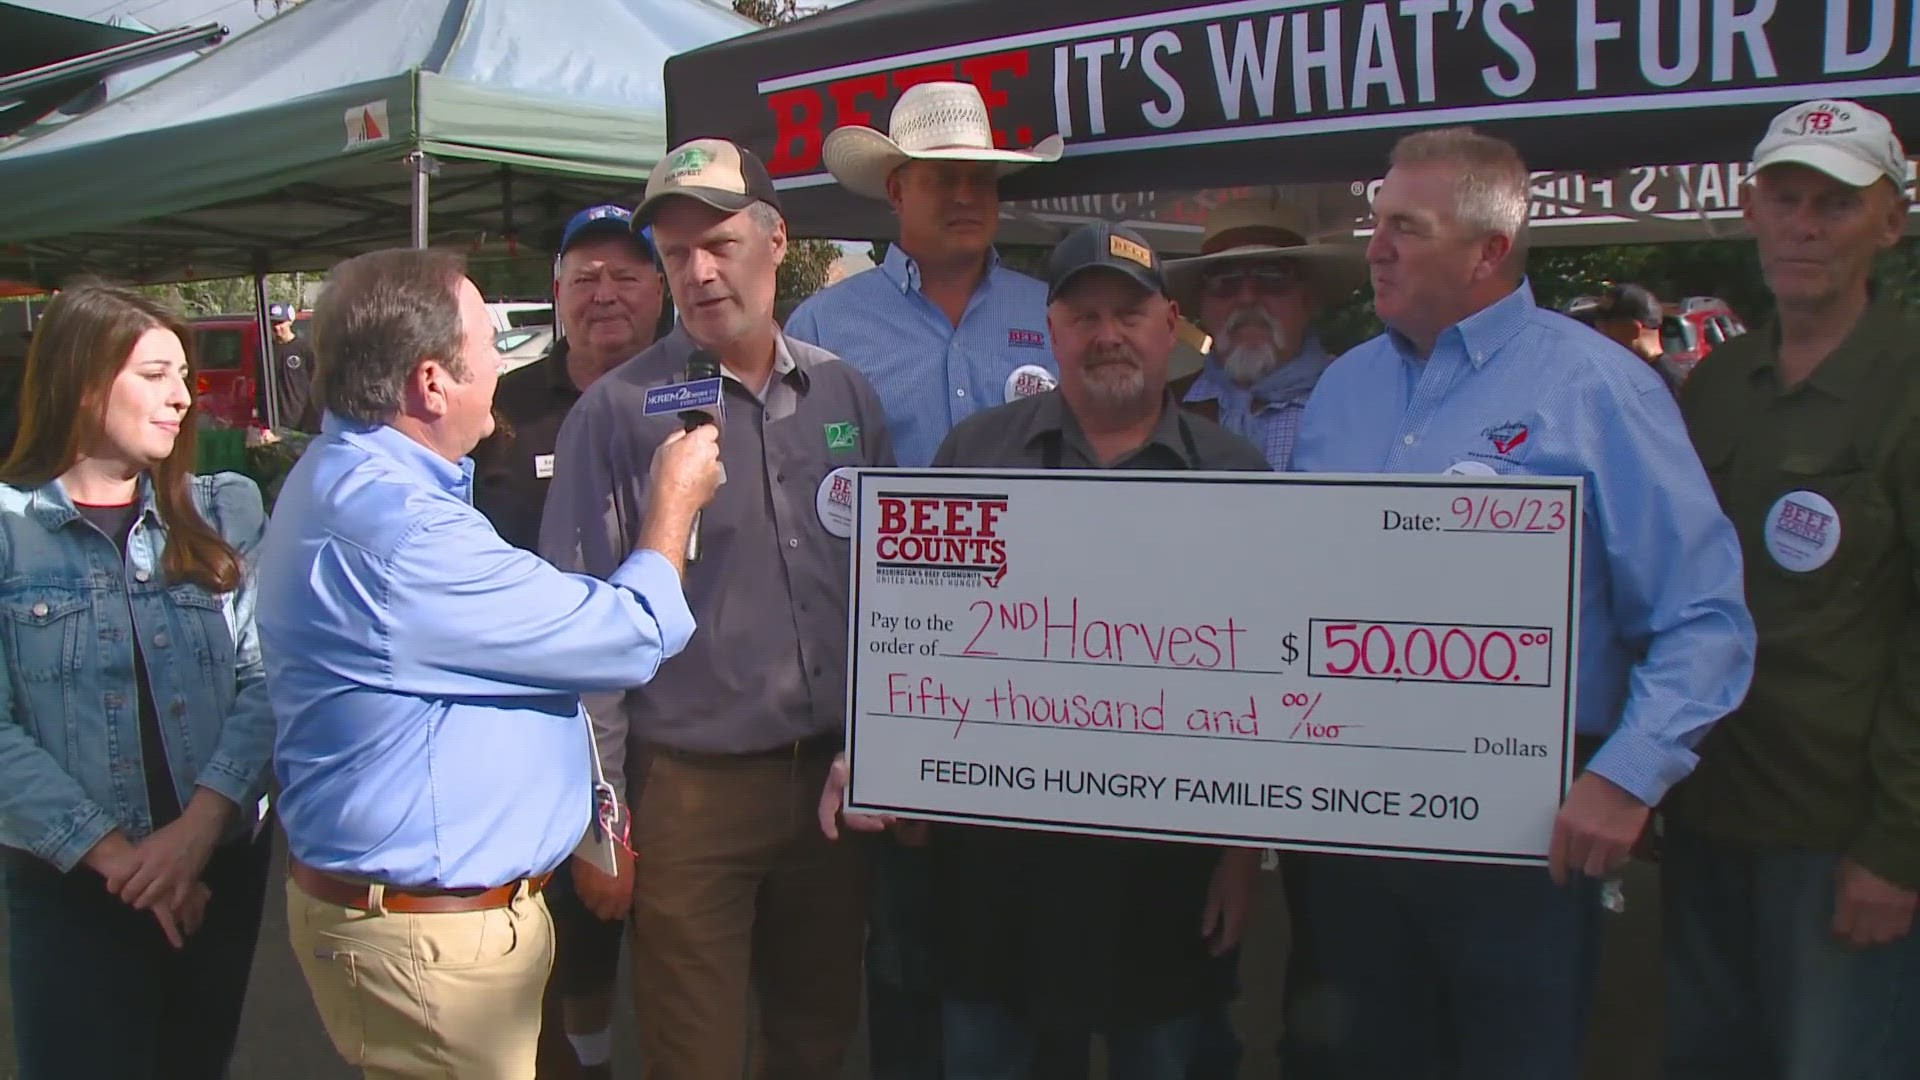 KREM 2's Tom Sherry was at that giveaway getting details on a big donation for Second Harvest.